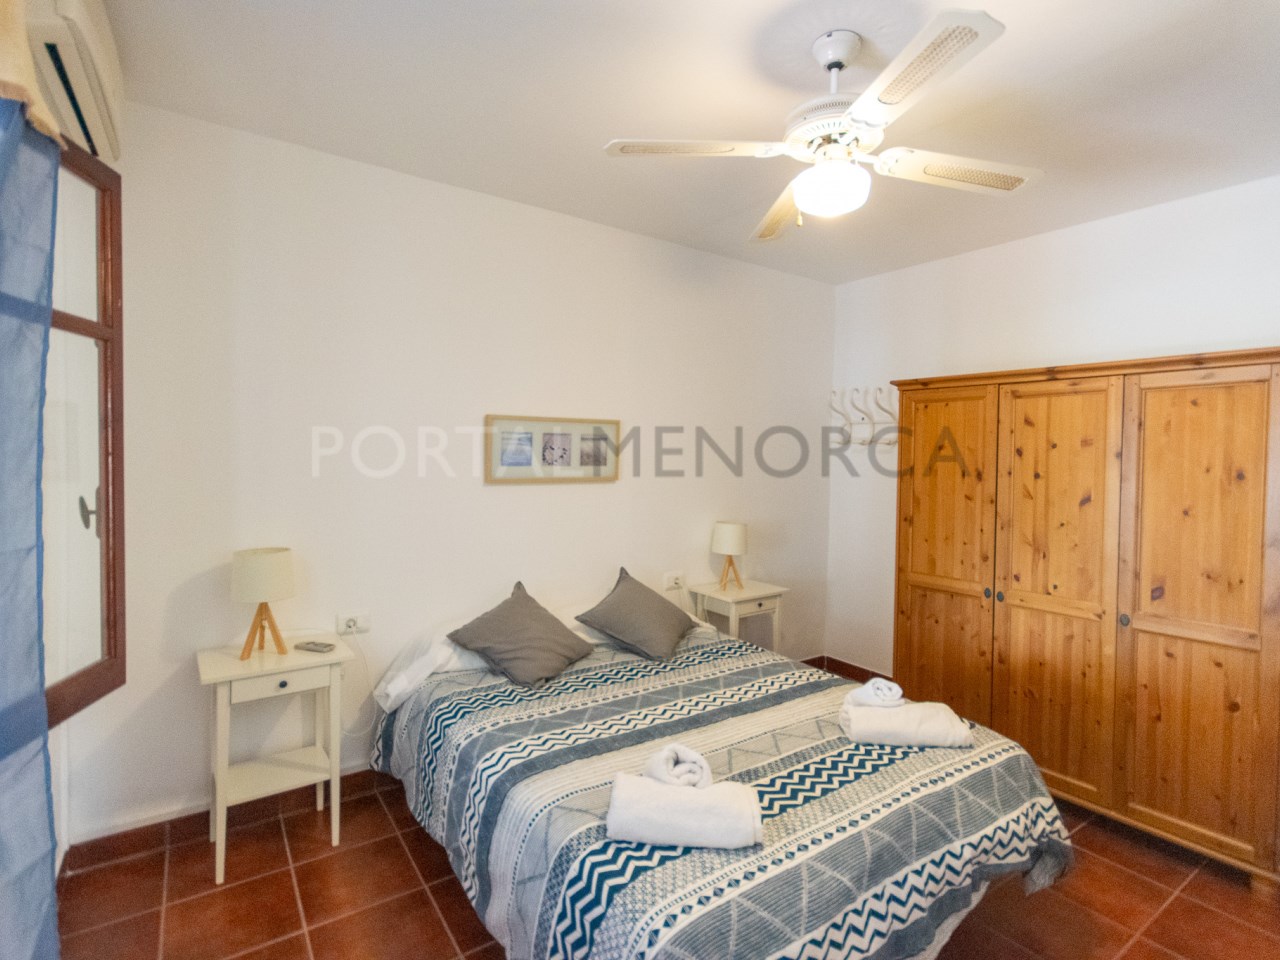 Bedroom of a villa with tourist license for sale in Cala n Bosch